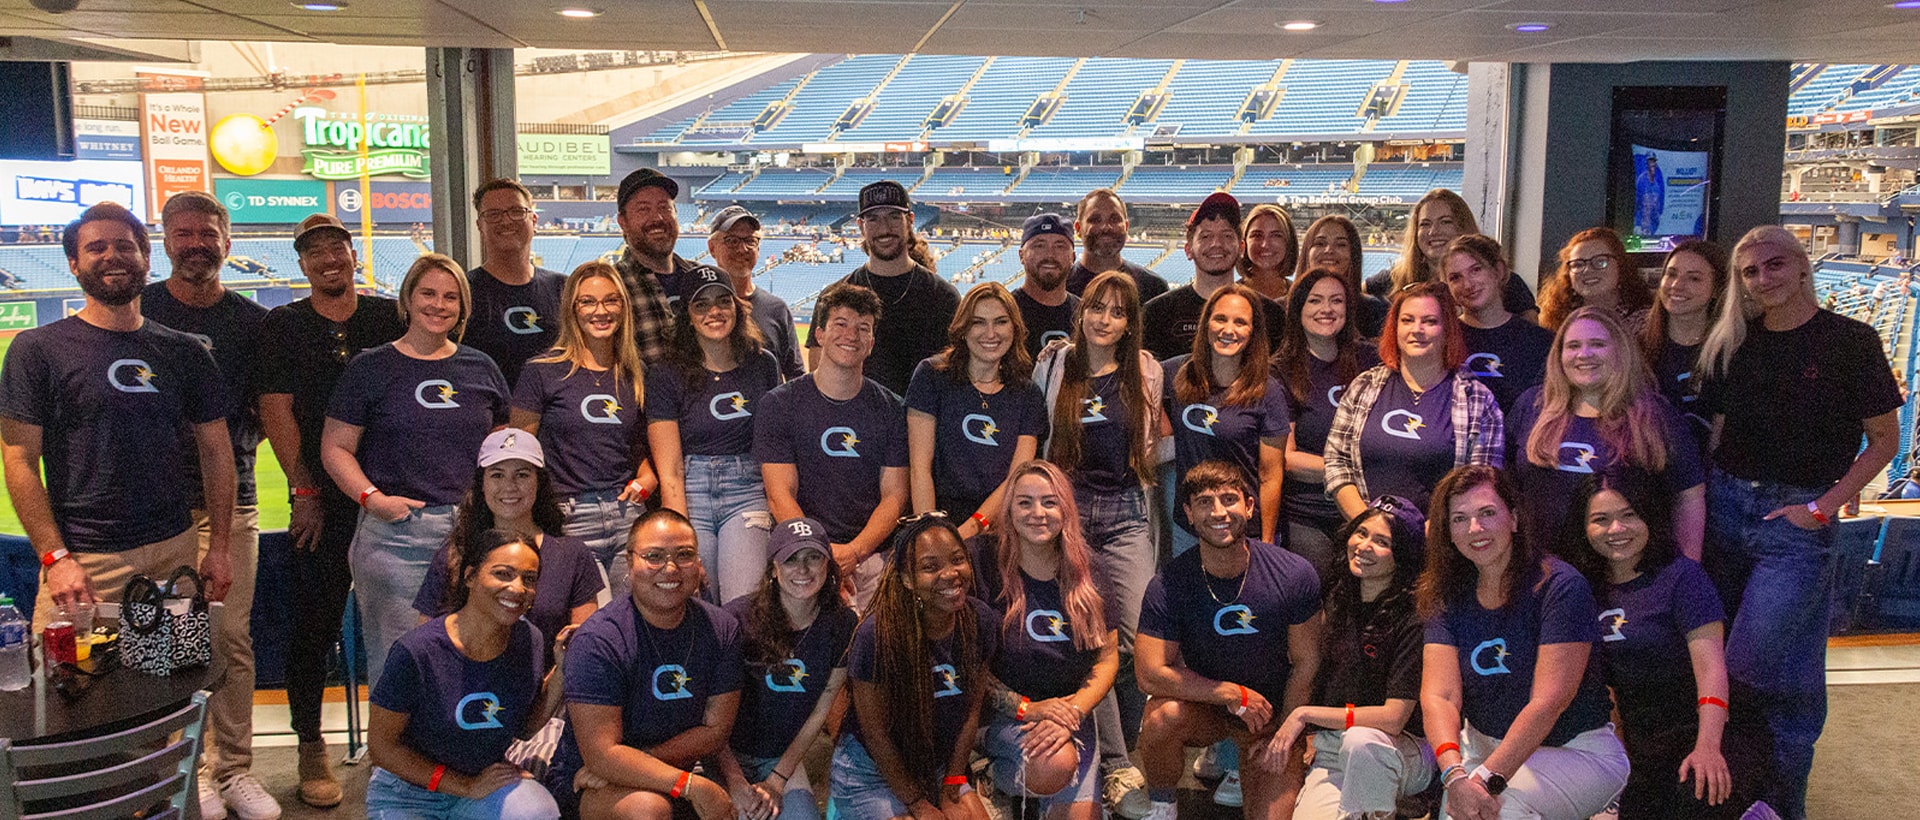 Photo of the CR team at a Rays game wearing matching CR-Rays logo t-shirts